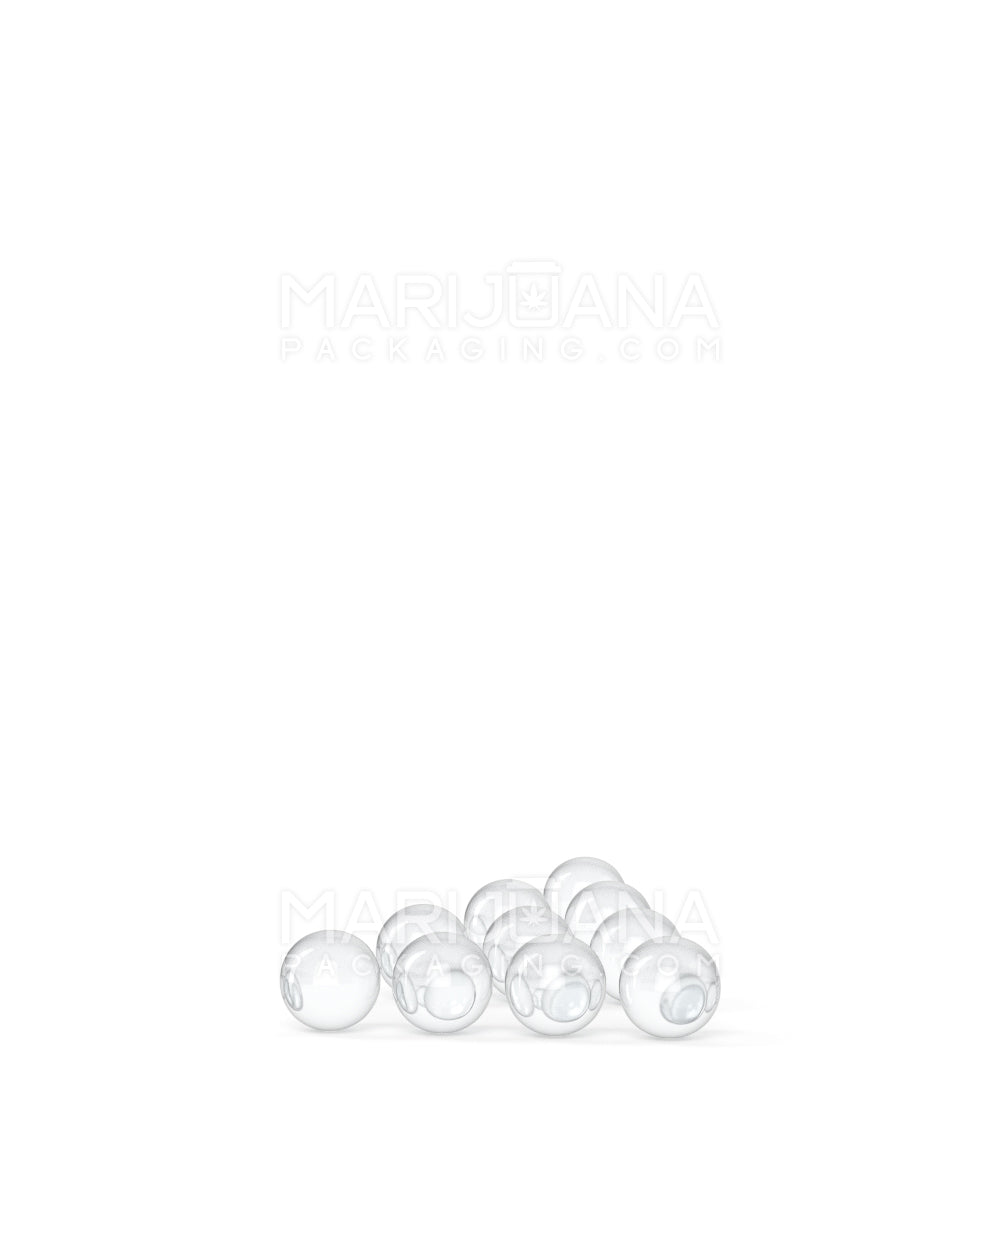 Thick 4mm Quartz Dab Pearls for Banger Nails - 10 Count - 4